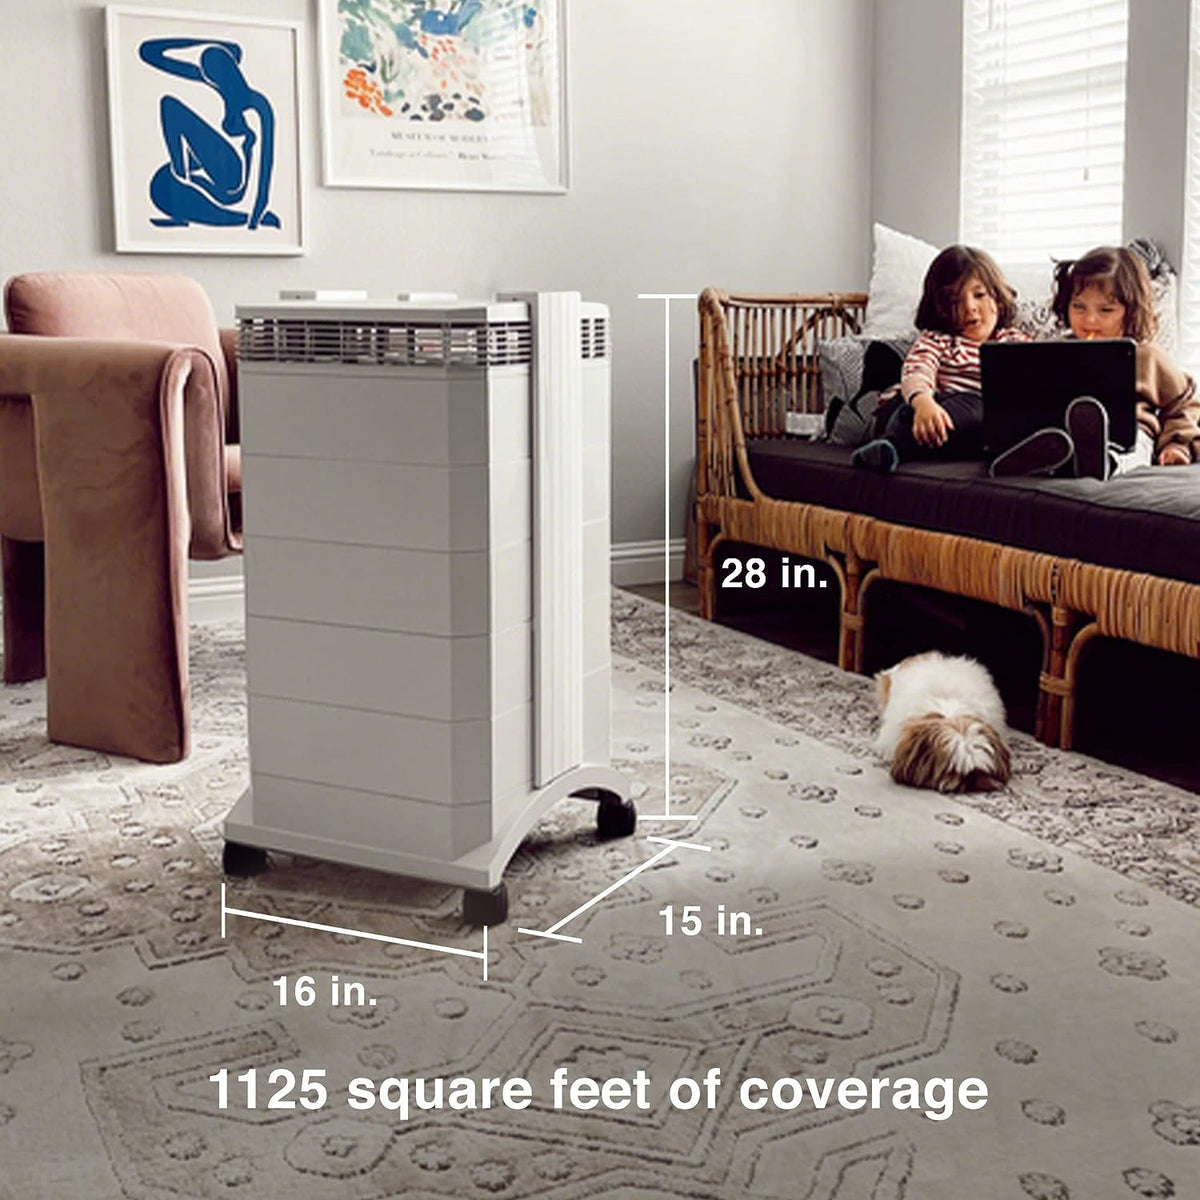 HealthPro Plus with dimensions and dog on floor